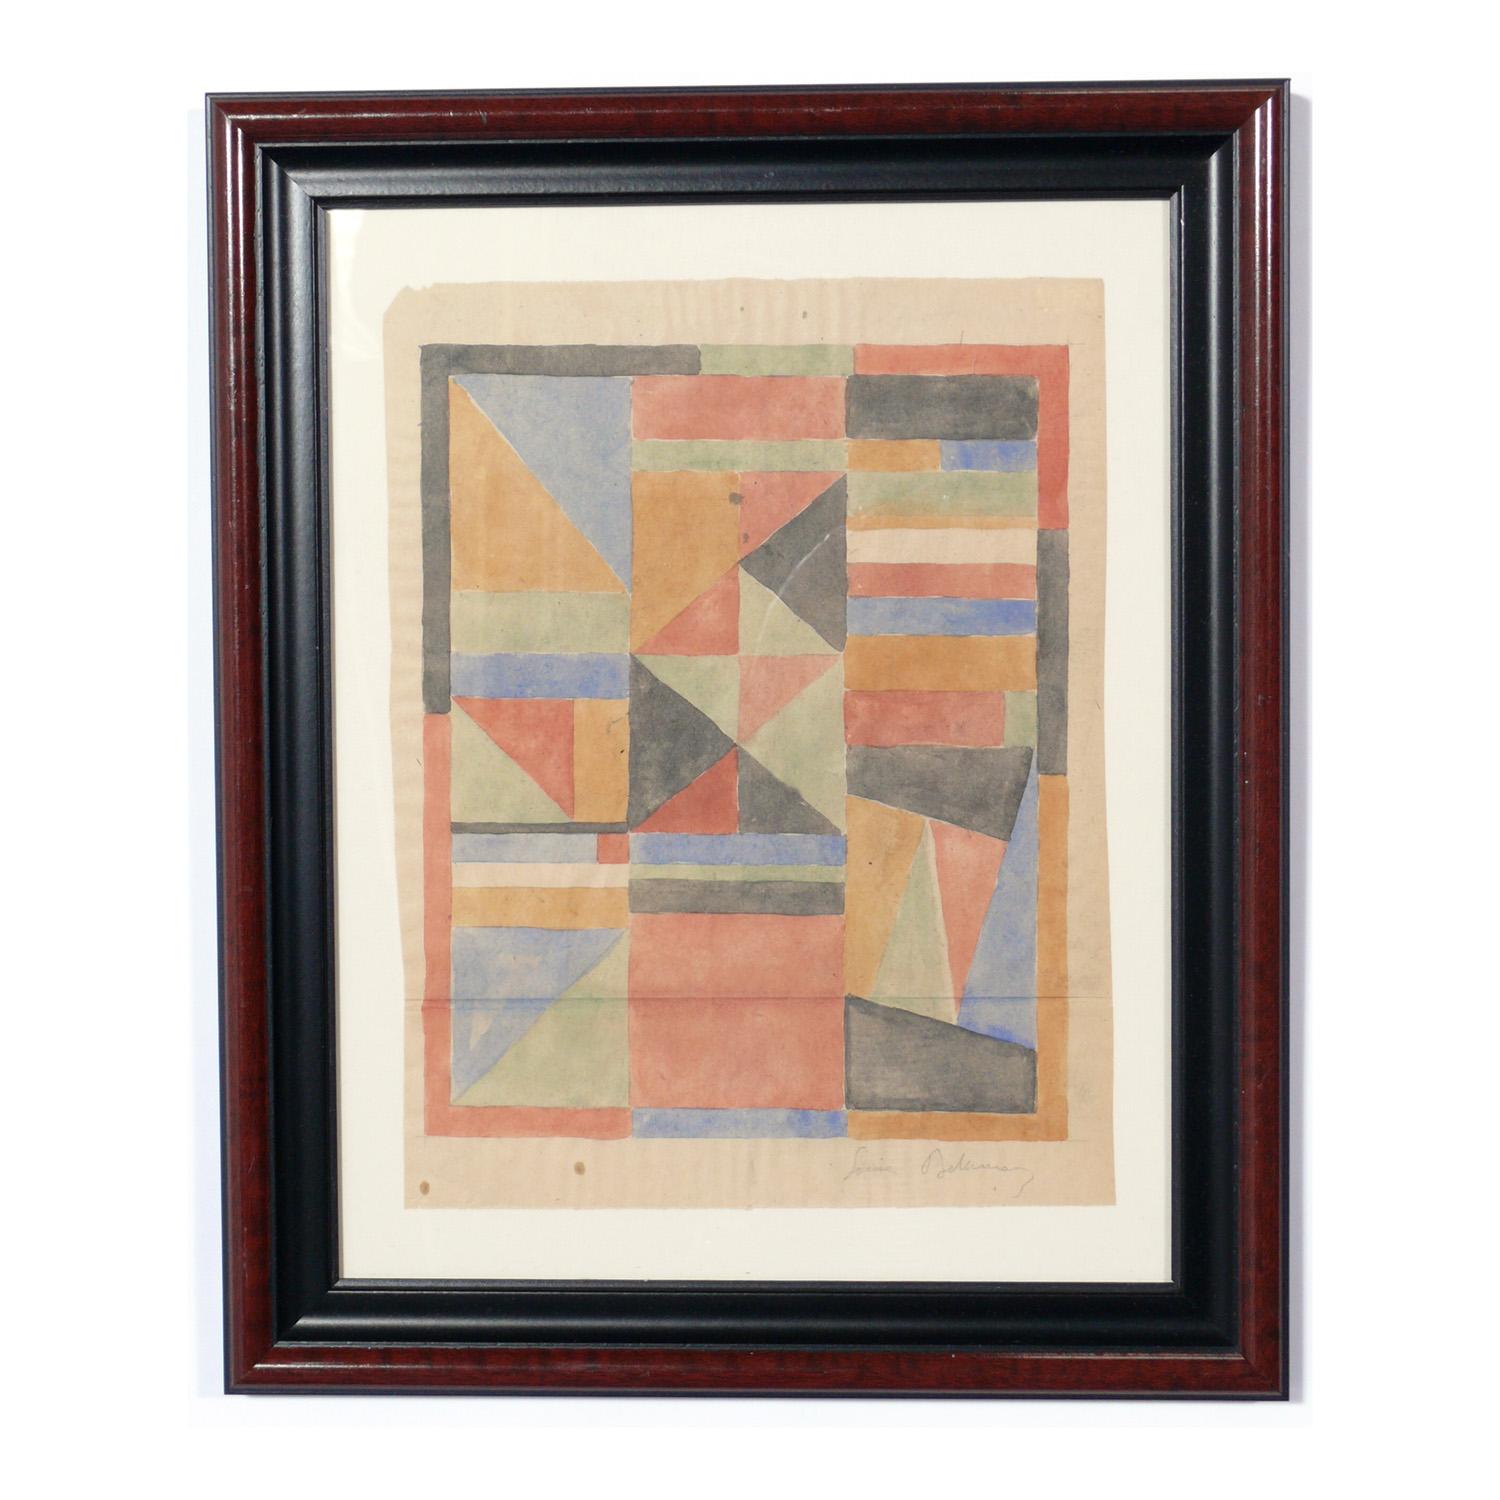 Selection of colorful modern art or gallery wall, circa 1940s-1970s. They are:
Top row, left to right:
1) Color Lithograph by Sonia Delaunay, French, circa 1950s. Pencil signed at lower right. It measures 16.5